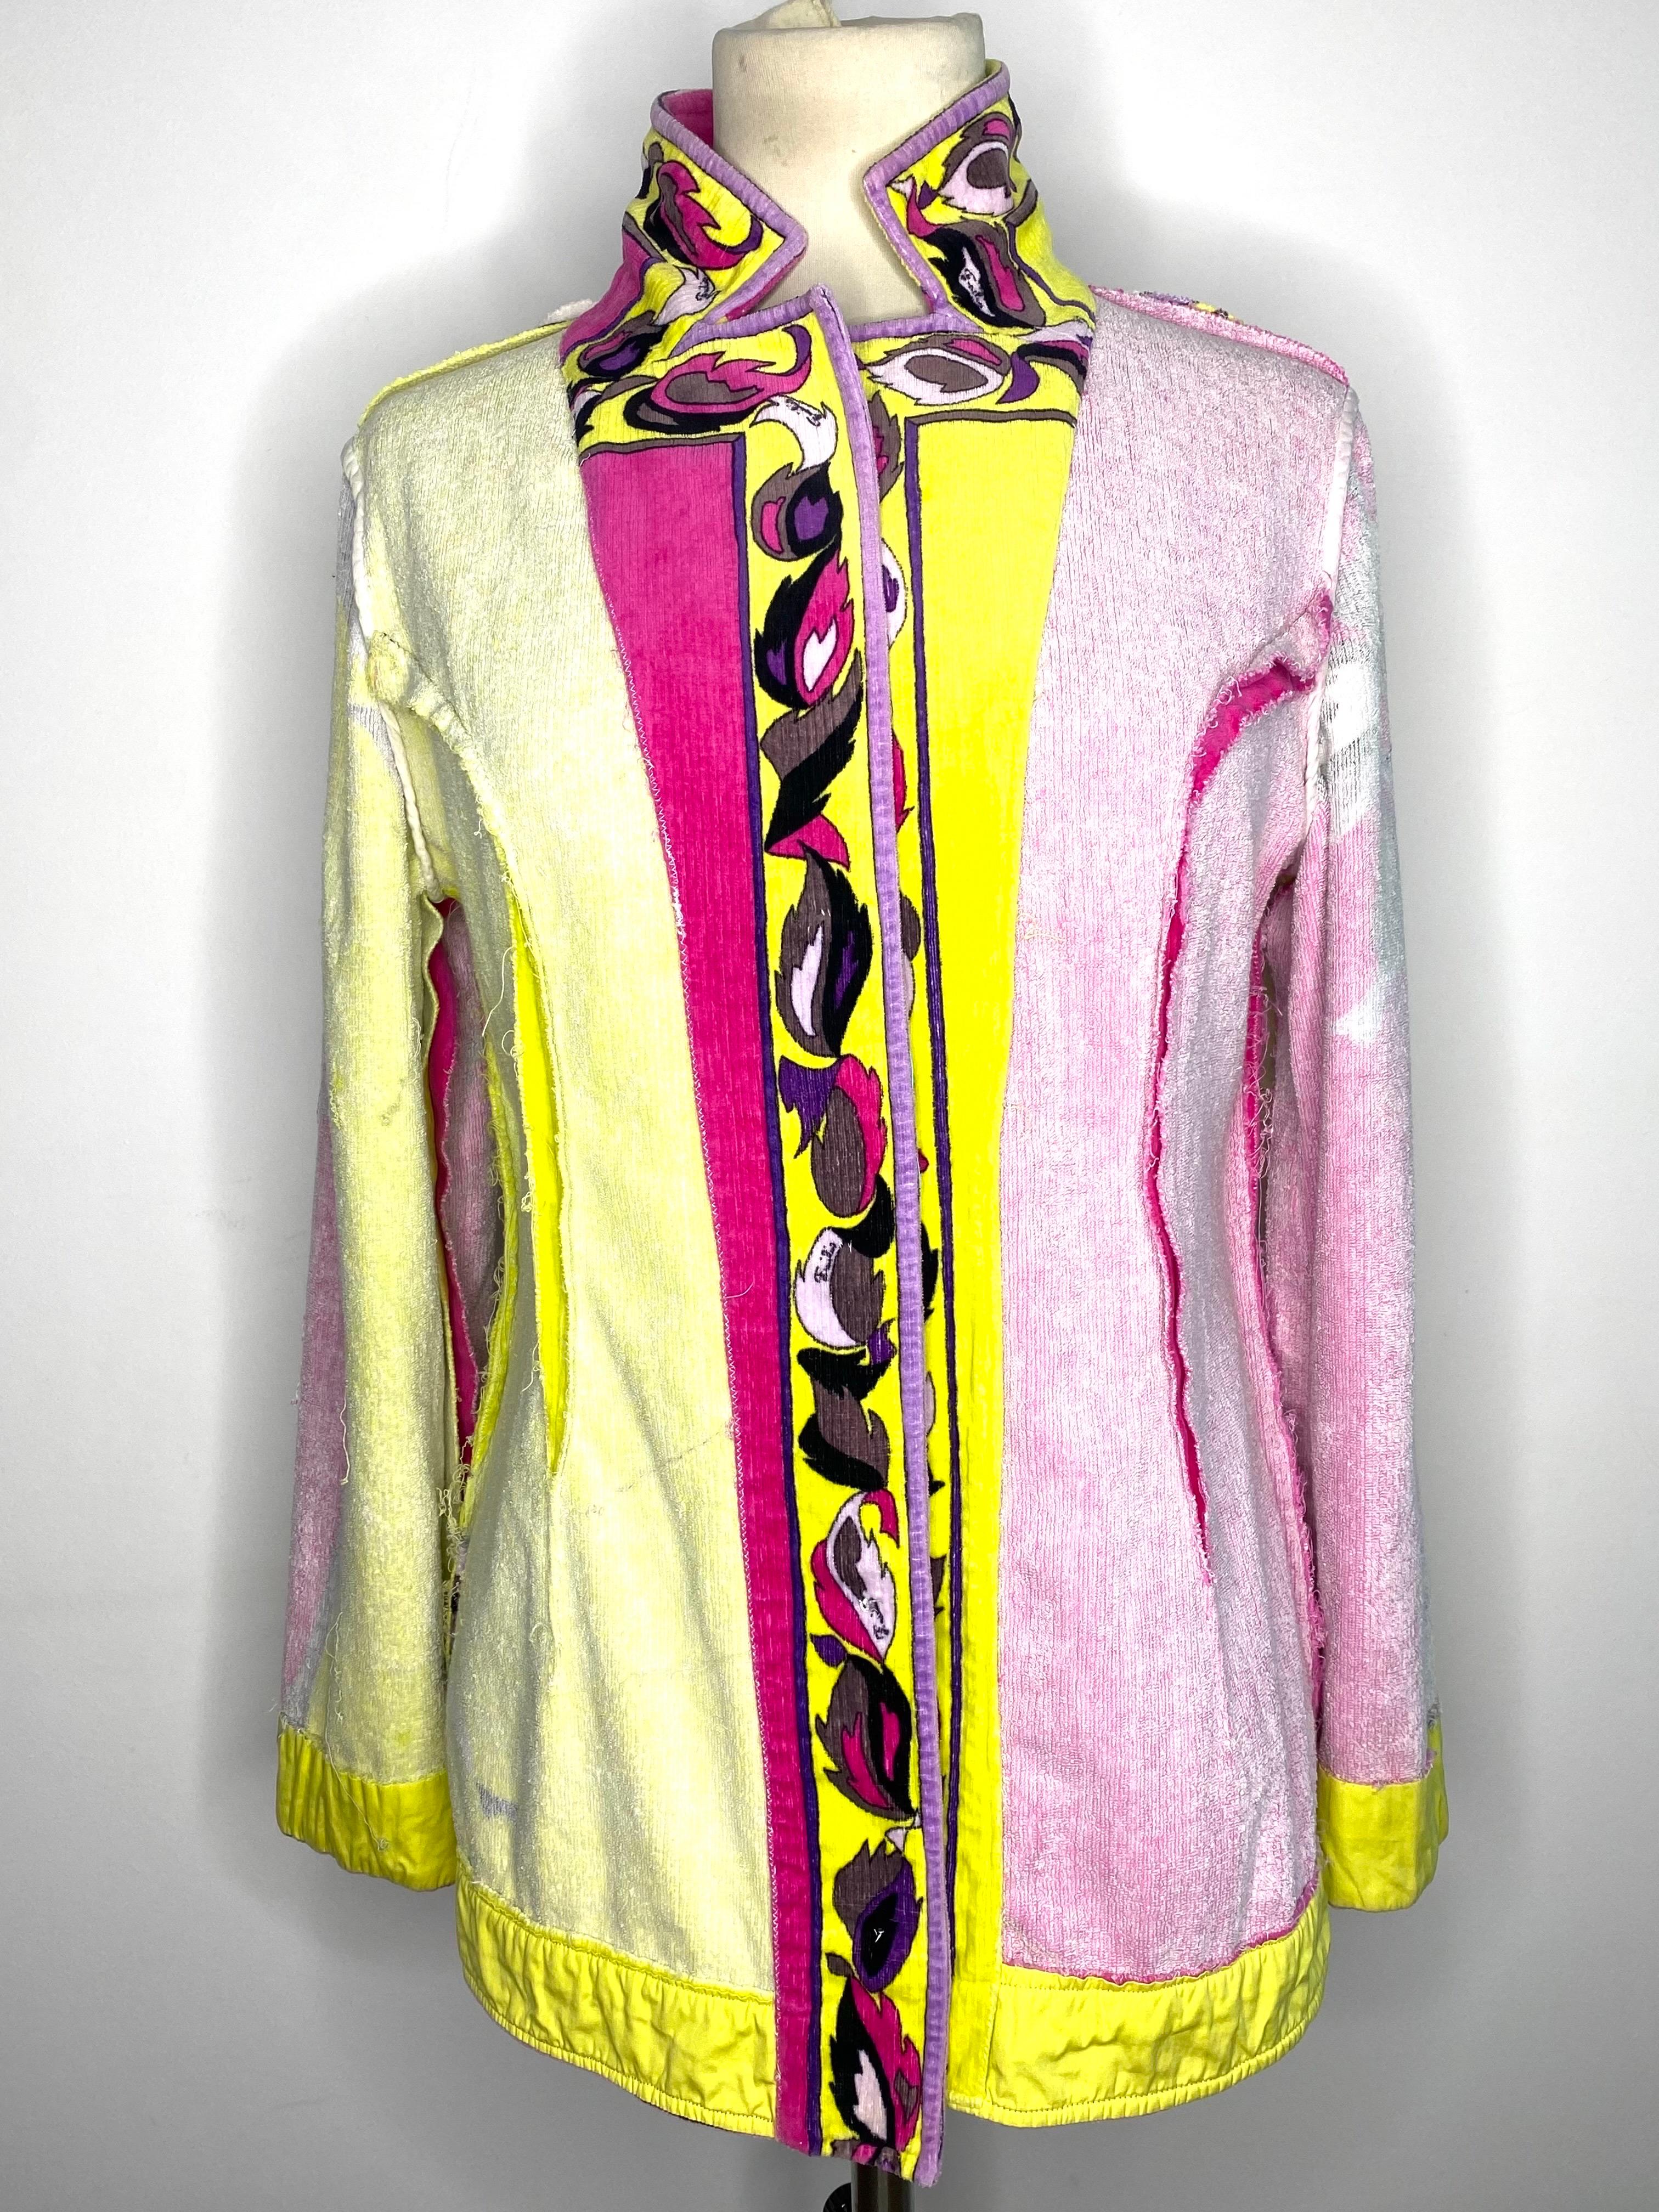 Emilio Pucci velvet jacket circa 1970 single breasted front For Sale 6